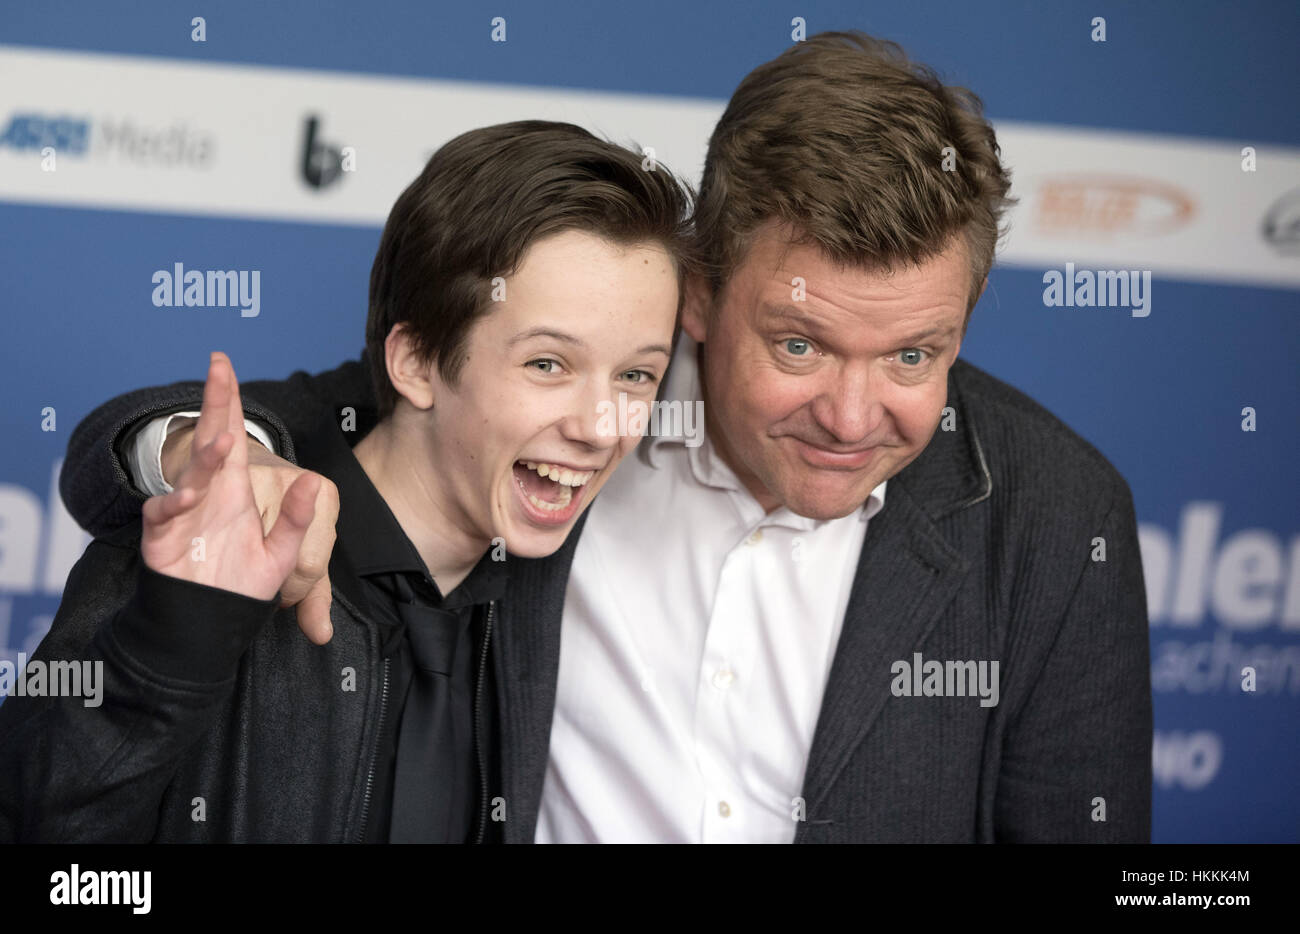 Berlin, Germany. 29th Jan, 2017. Actors Arved Friese (l) and Justus Dohnanyi arrive for the premiere the movie 'Timm Thaler oder das verkaufte Lachen' (lit. Thaler or the sold